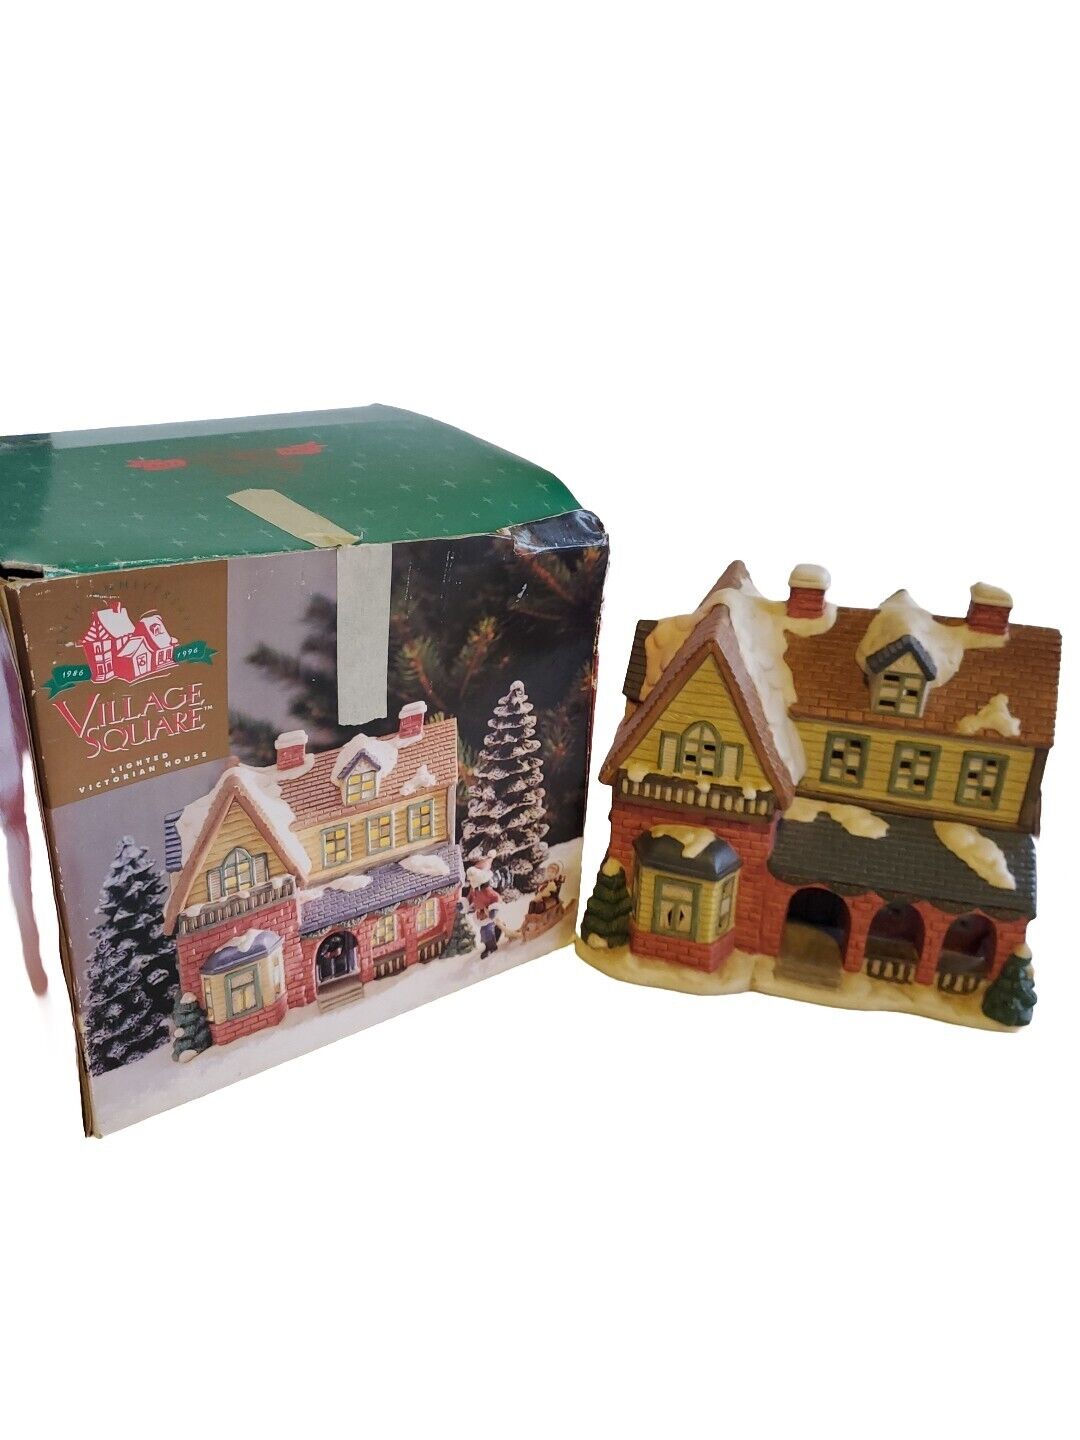 Mervyn's Village Square Christmas 1996 Lighted Victorian House 10th Anniversary 